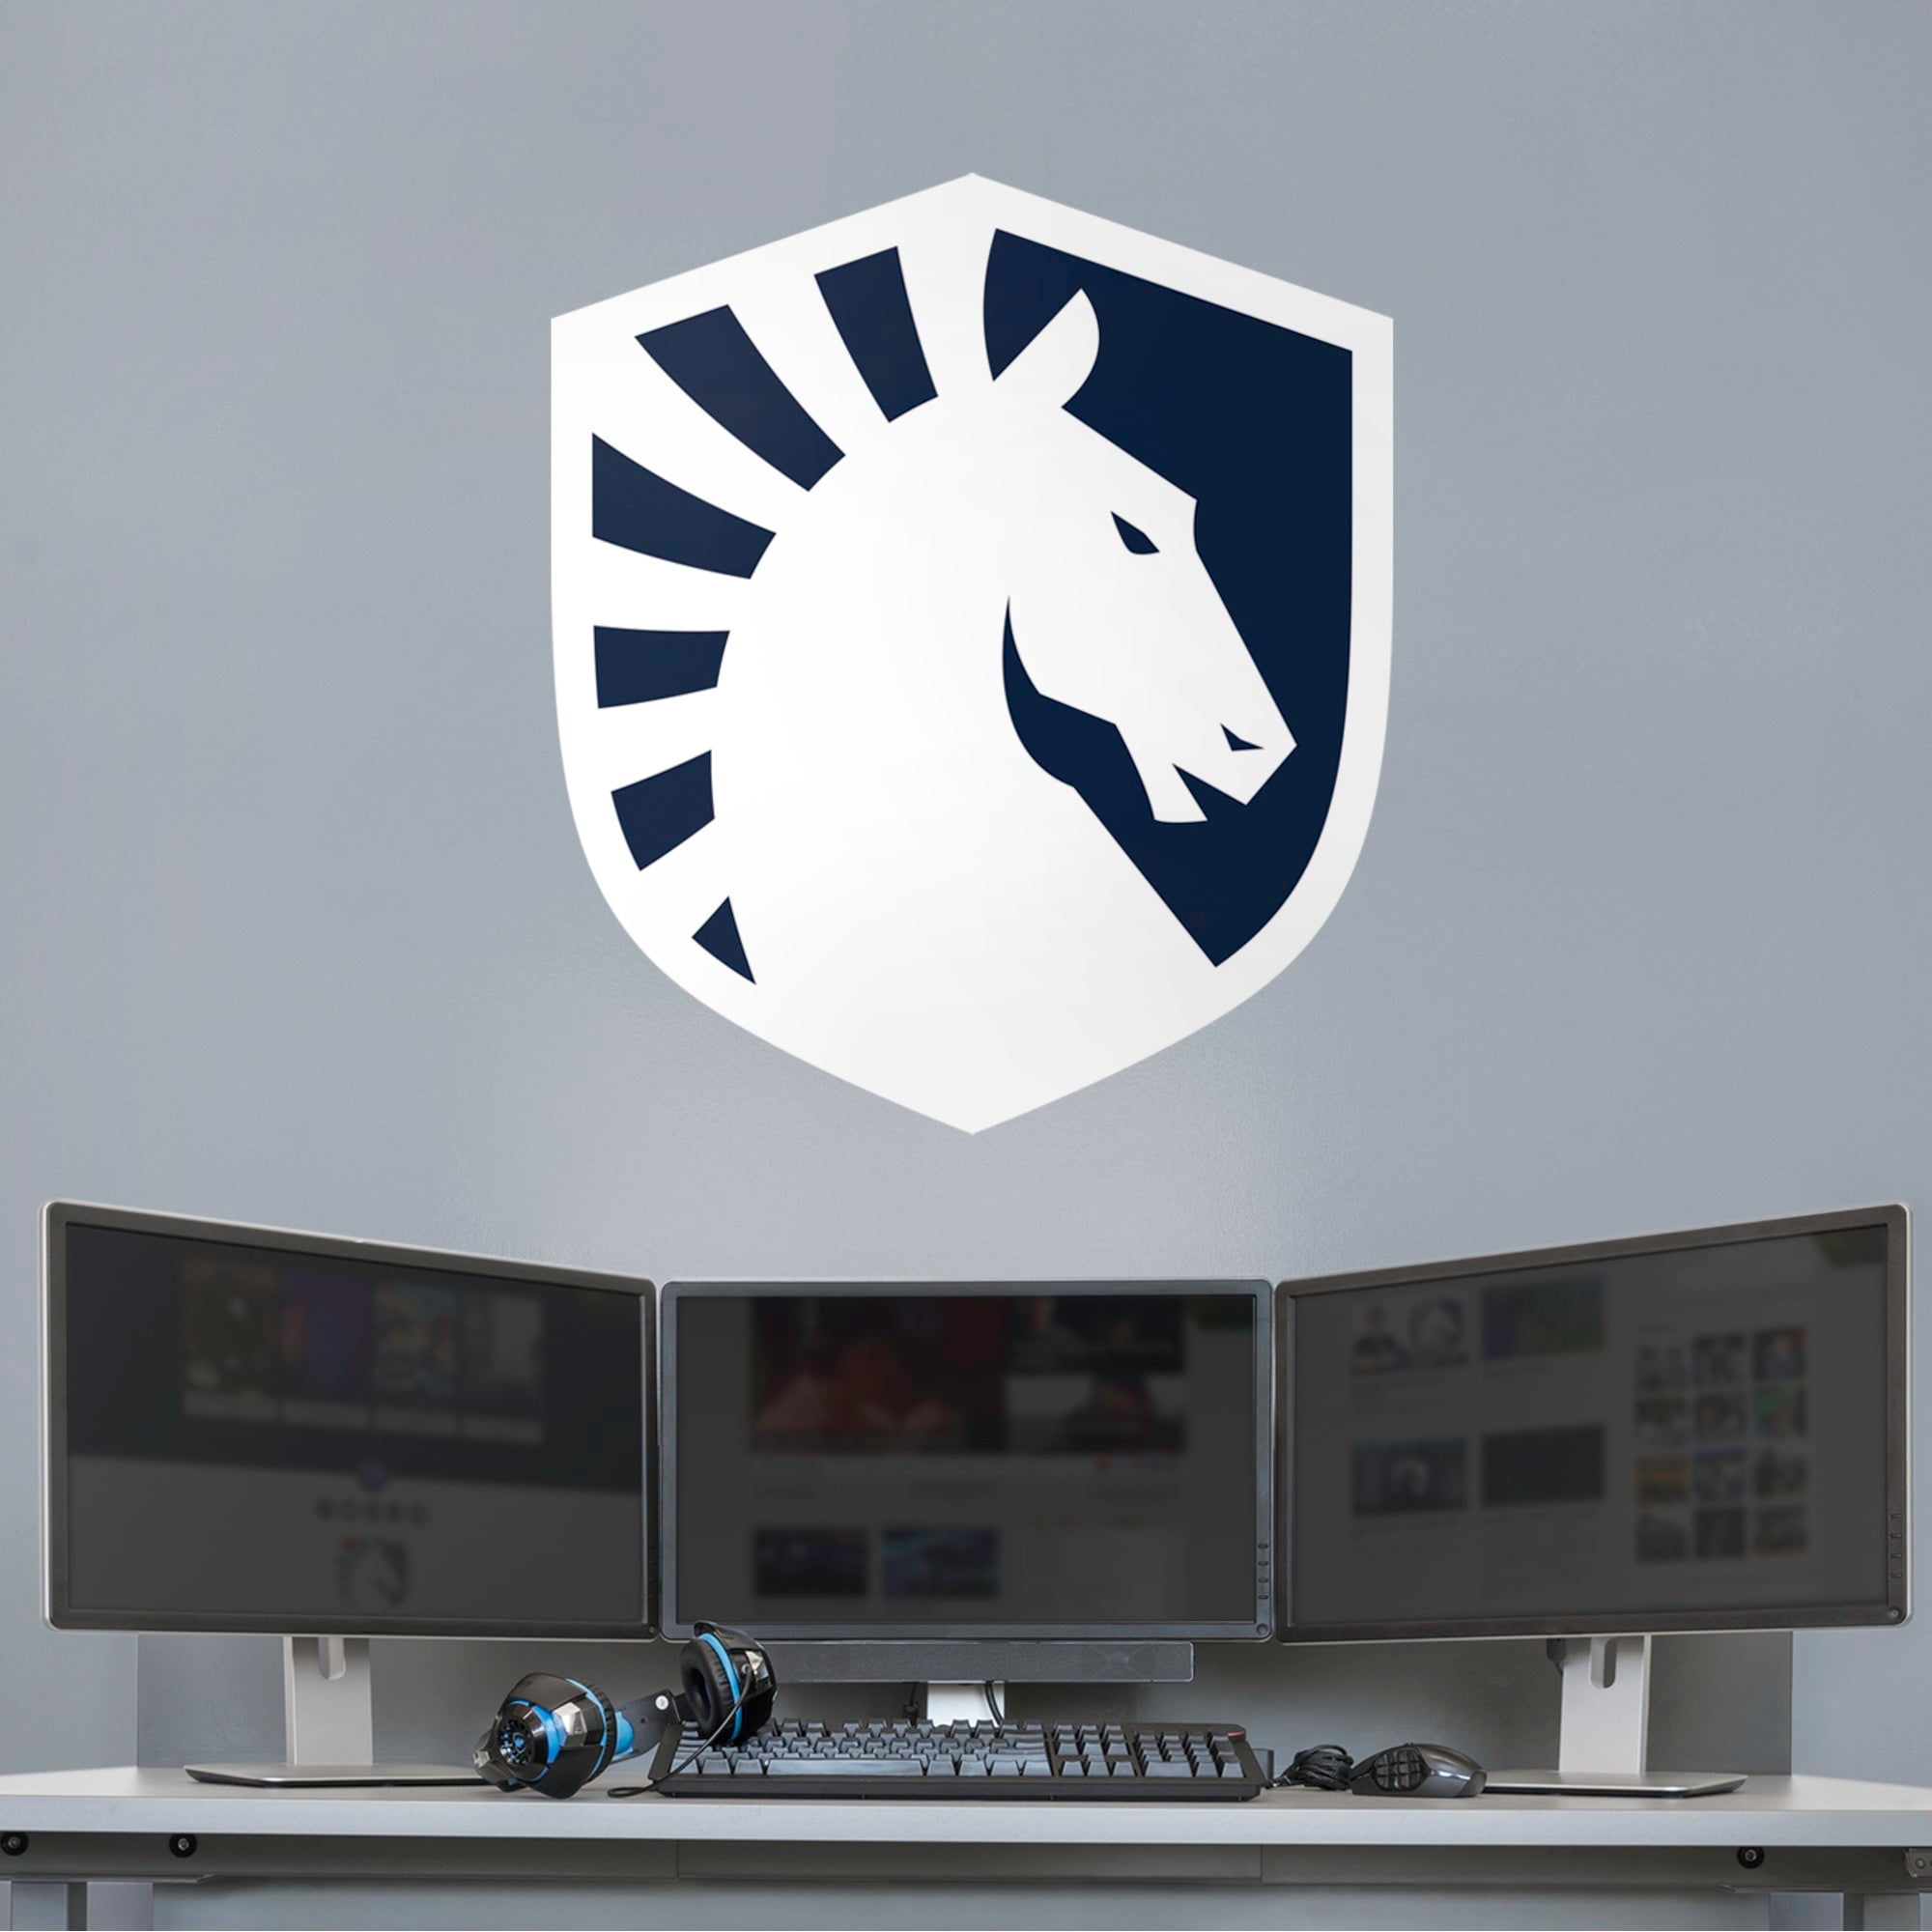 Team Liquid: Logo - Officially Licensed Removable Wall Decal 34.0"W x 39.0"H by Fathead | Vinyl